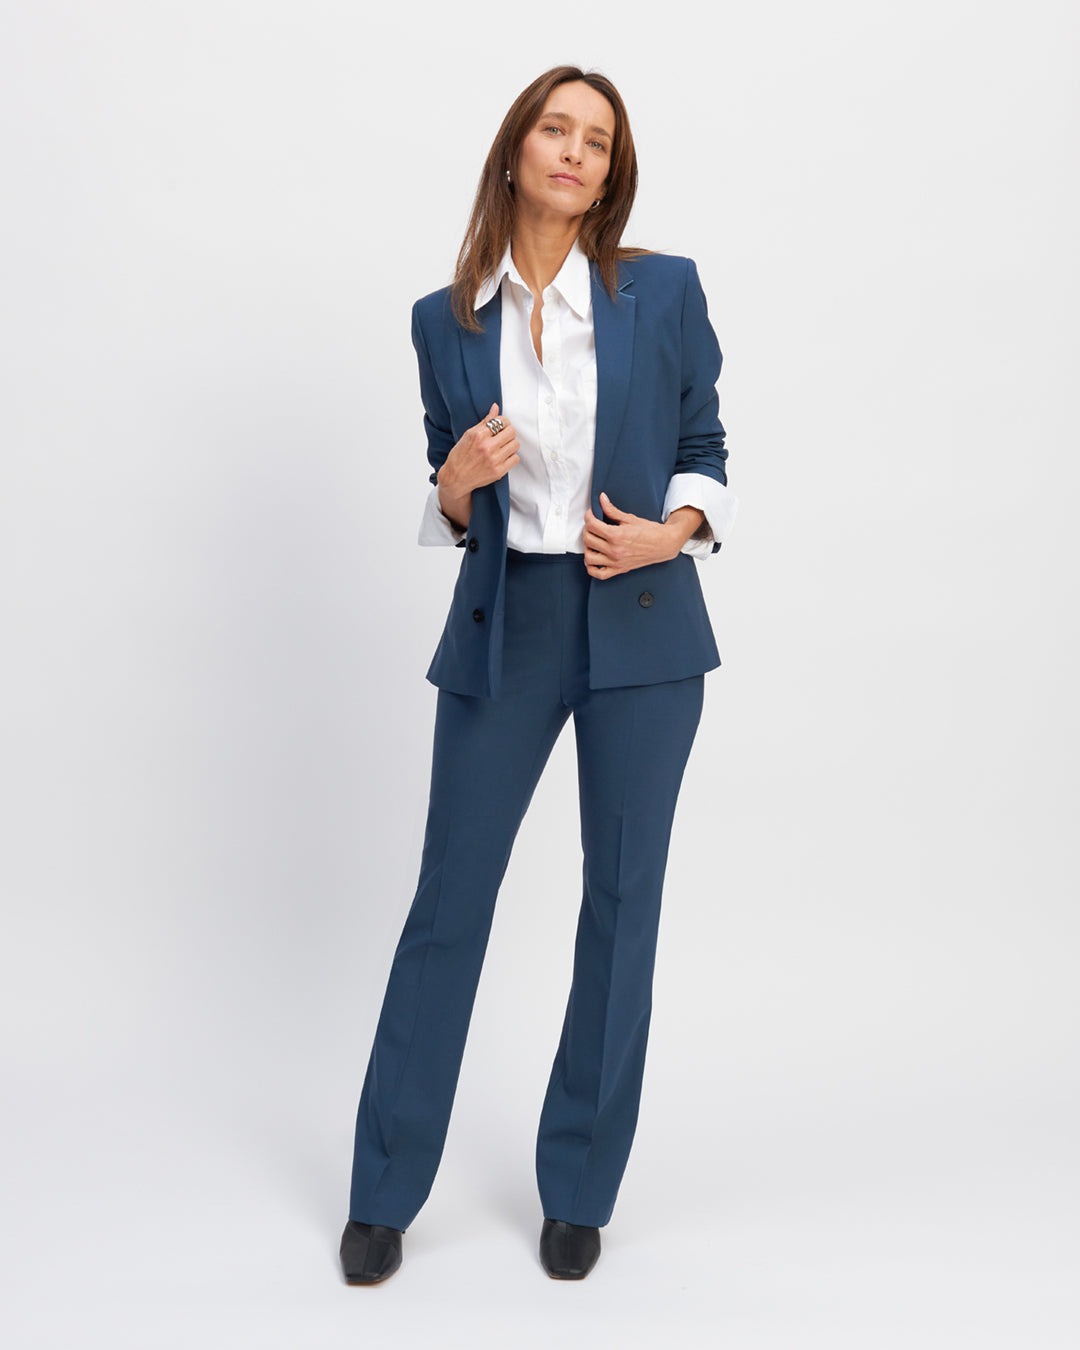 Trousers-waistcoat-blue-grey-High-waist-Clear-cut-flared-at-ankles-Decoration-buttons-covered-asymmetrical-Side-zip-Length-inside-leg-80,5-cm-for-one-36-17H10-women's-waistcoat-paris-